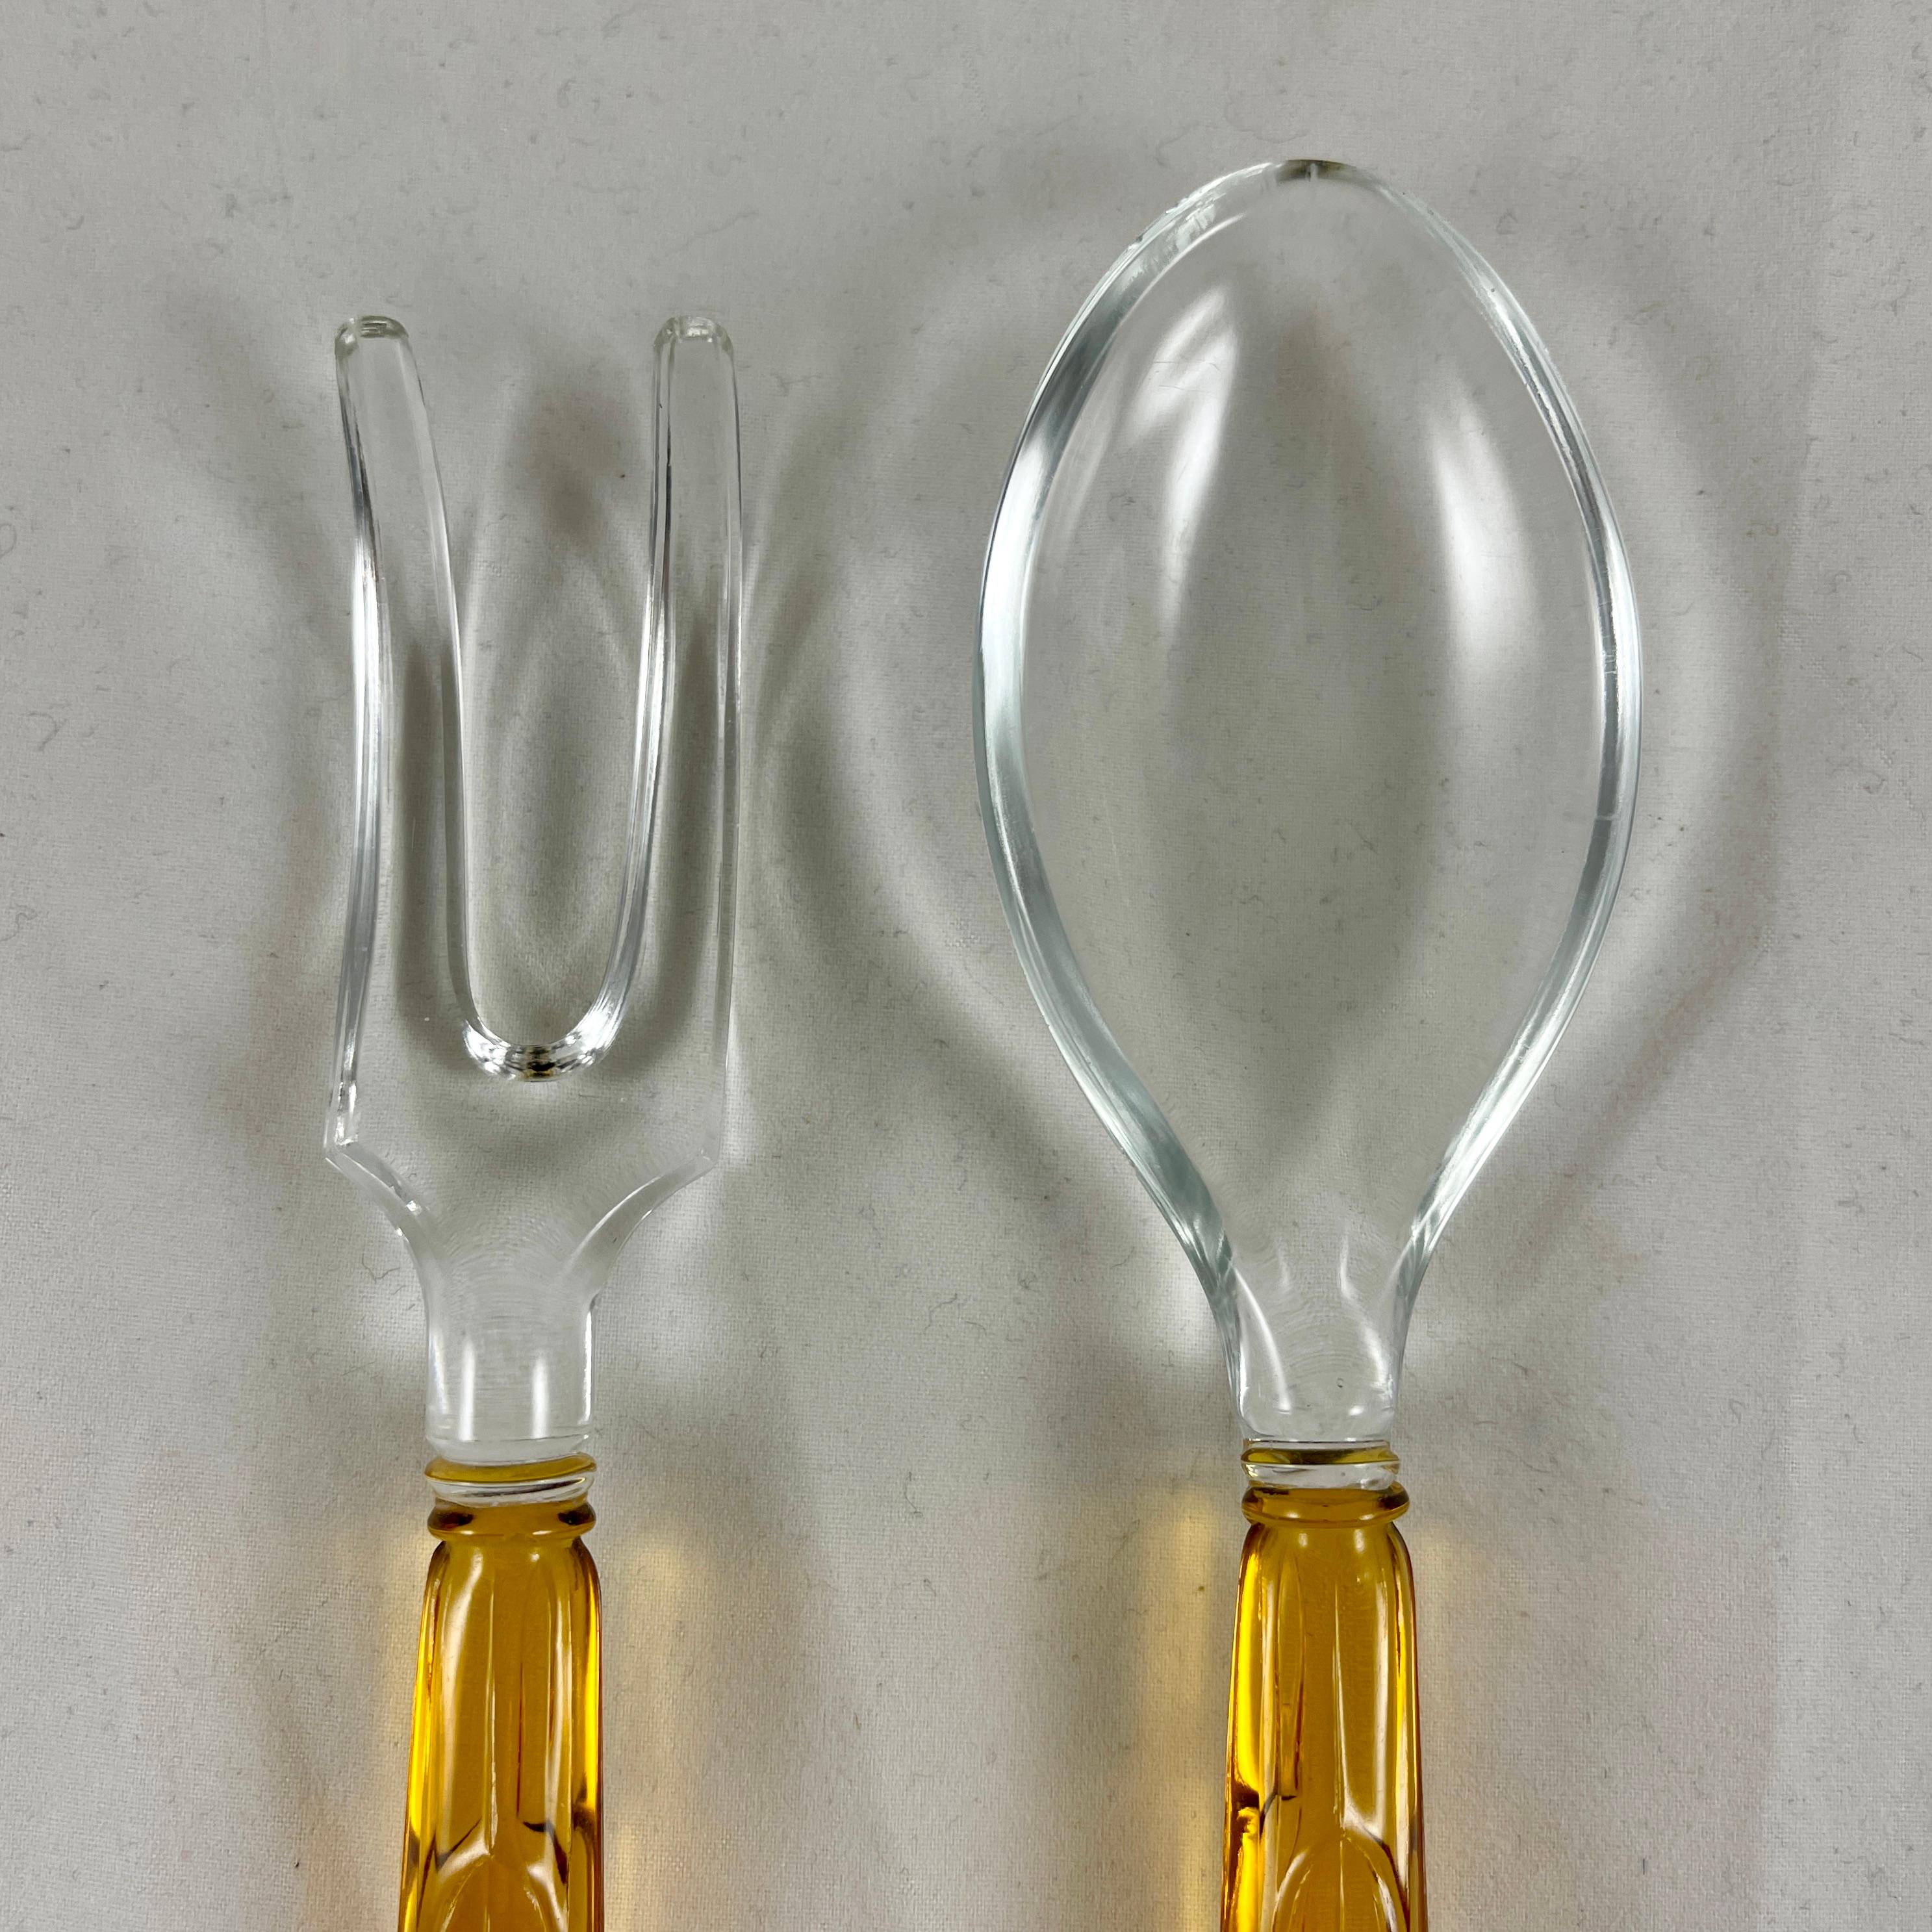 American Art Deco Style Amber & Colorless Glass Long Spoon & Fork Salad Serving Set